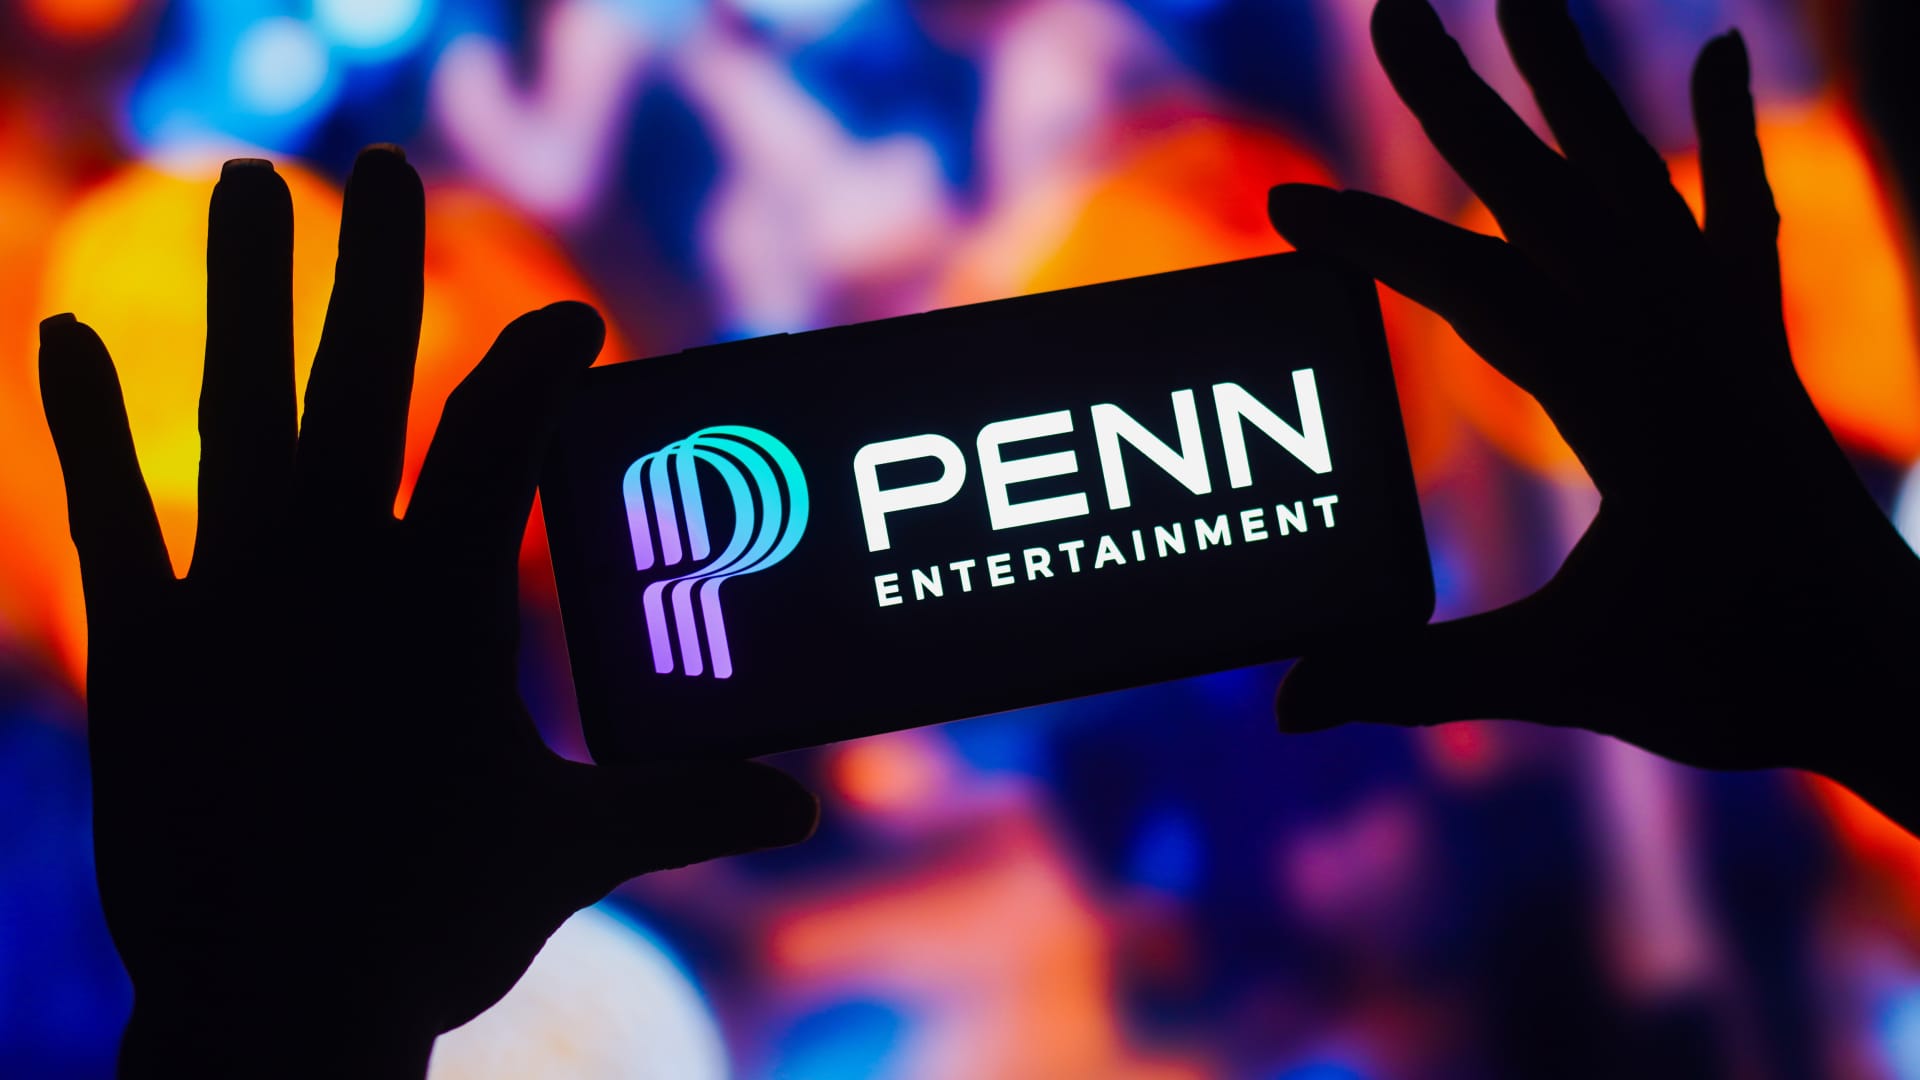 The Penn Entertainment logo is displayed on a smartphone screen.